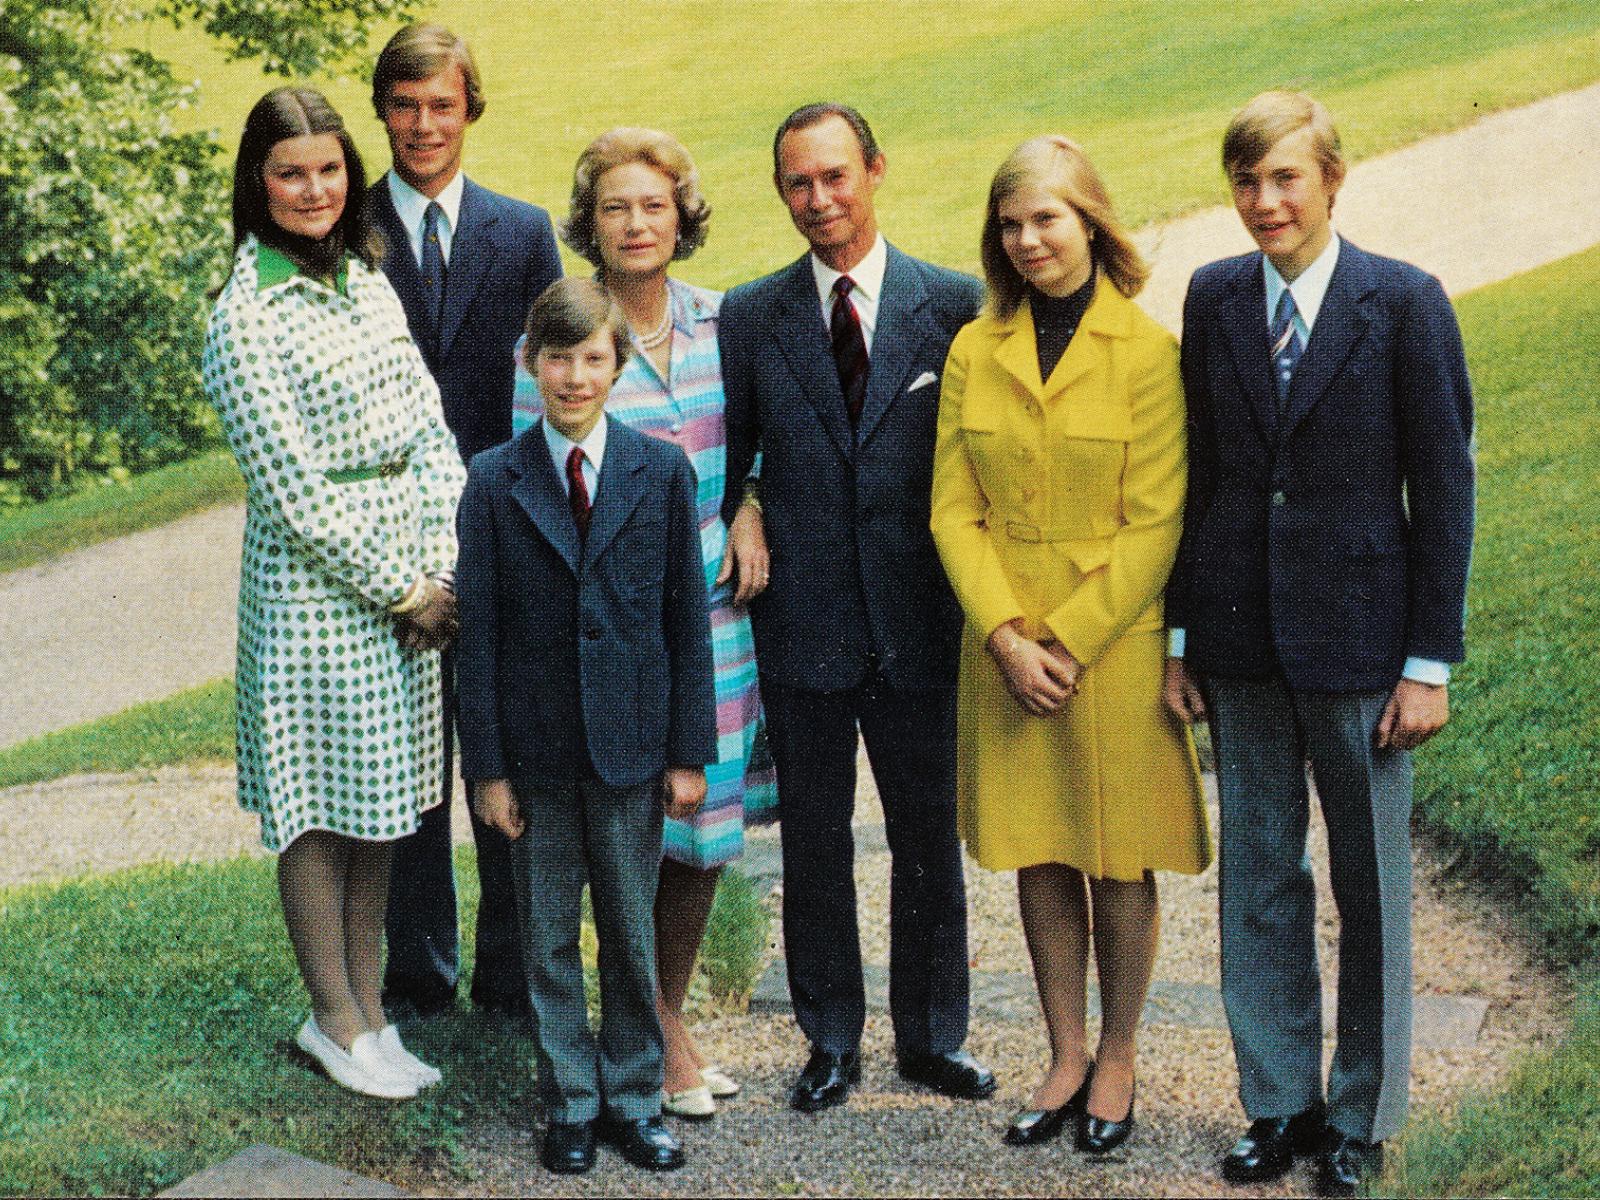 The Grand Ducal Family